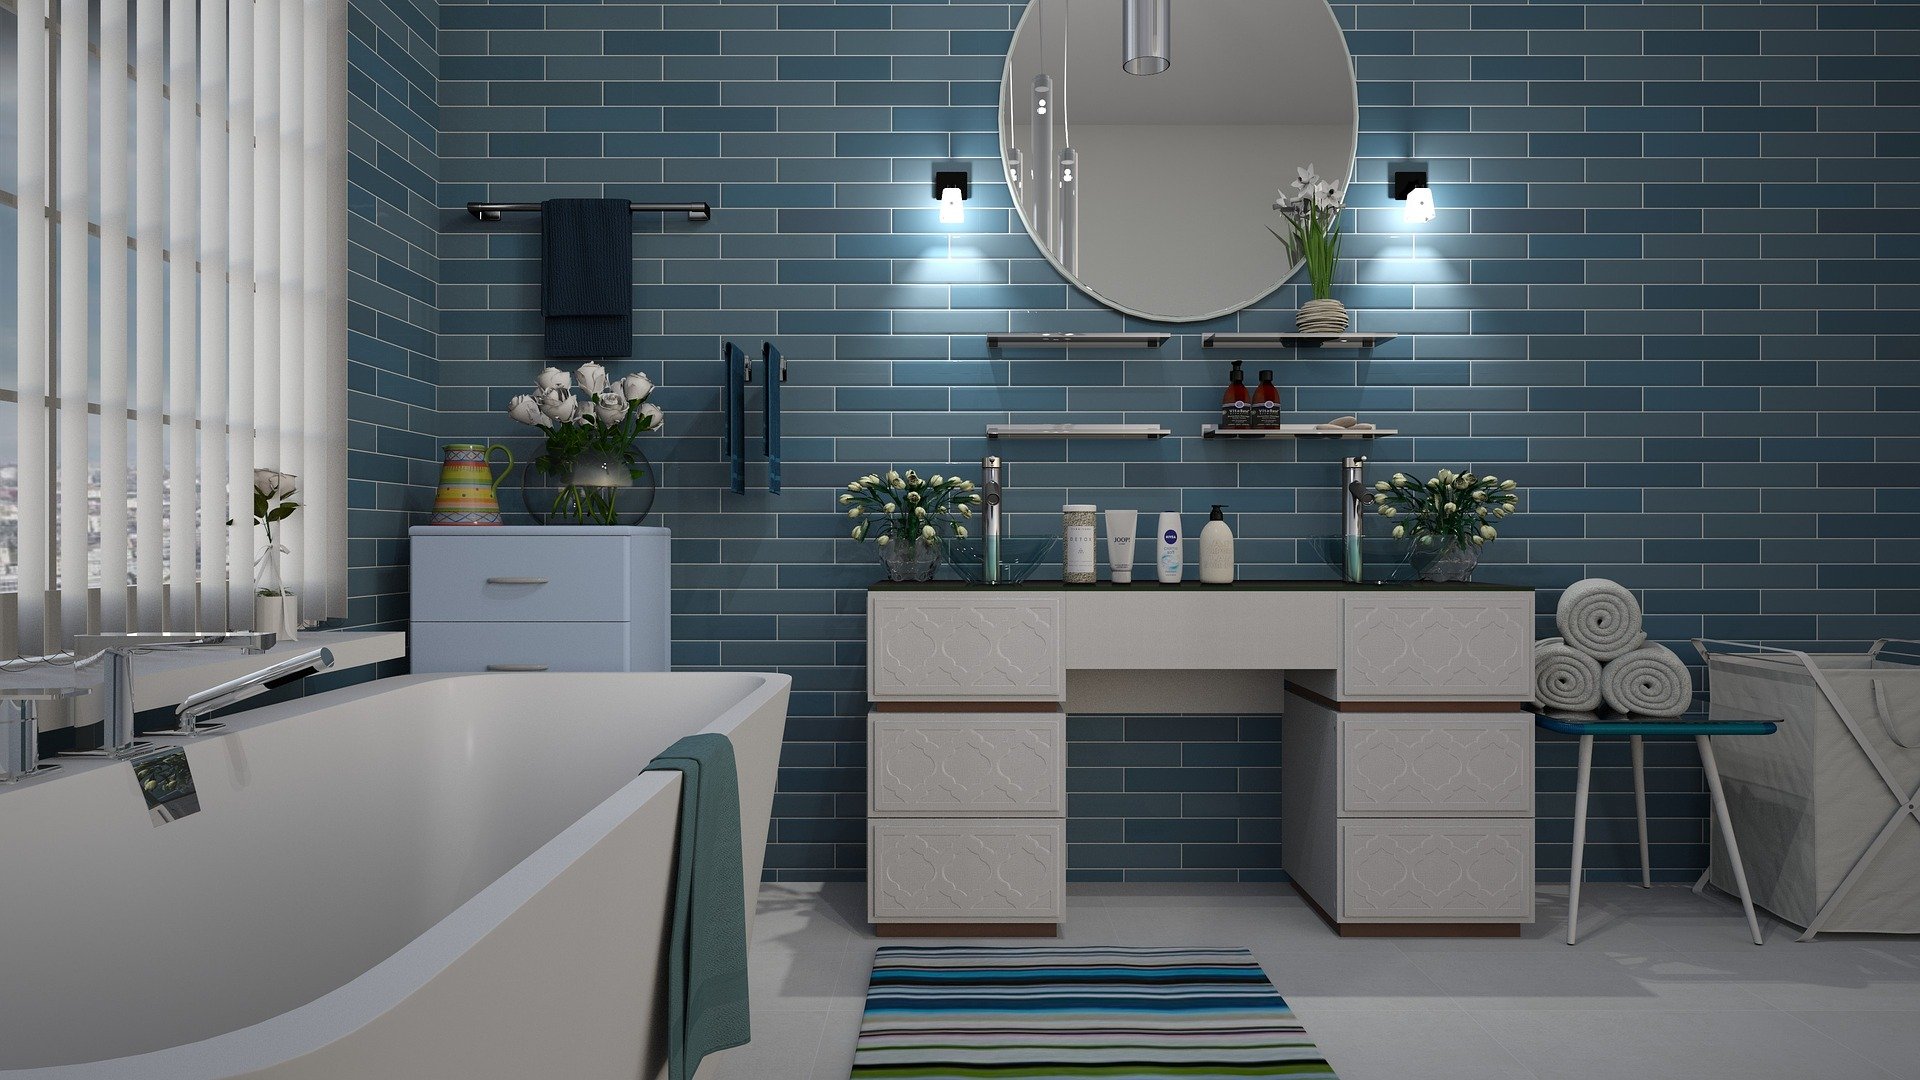 Bathroom Renovation: How To Pick the Perfect Tiles